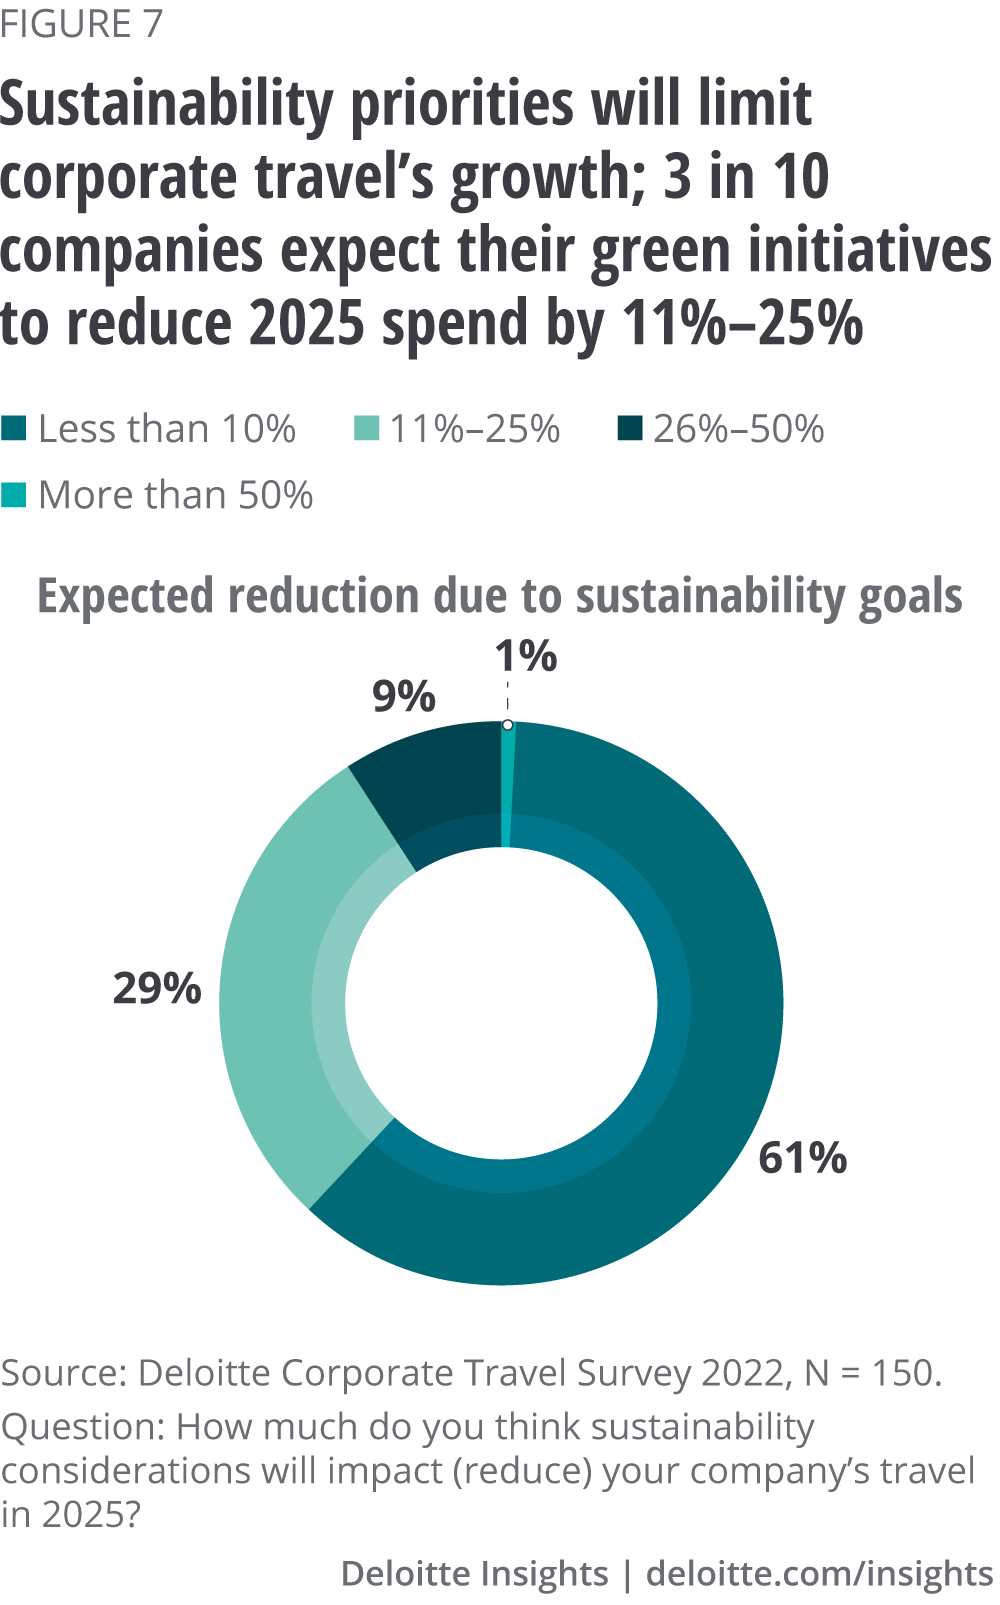 Figure 7. Sustainability priorities will limit corporate travel’s growth. Three in 10 companies expect their green initiatives to bring an 11–25% reduction in 2025 spend